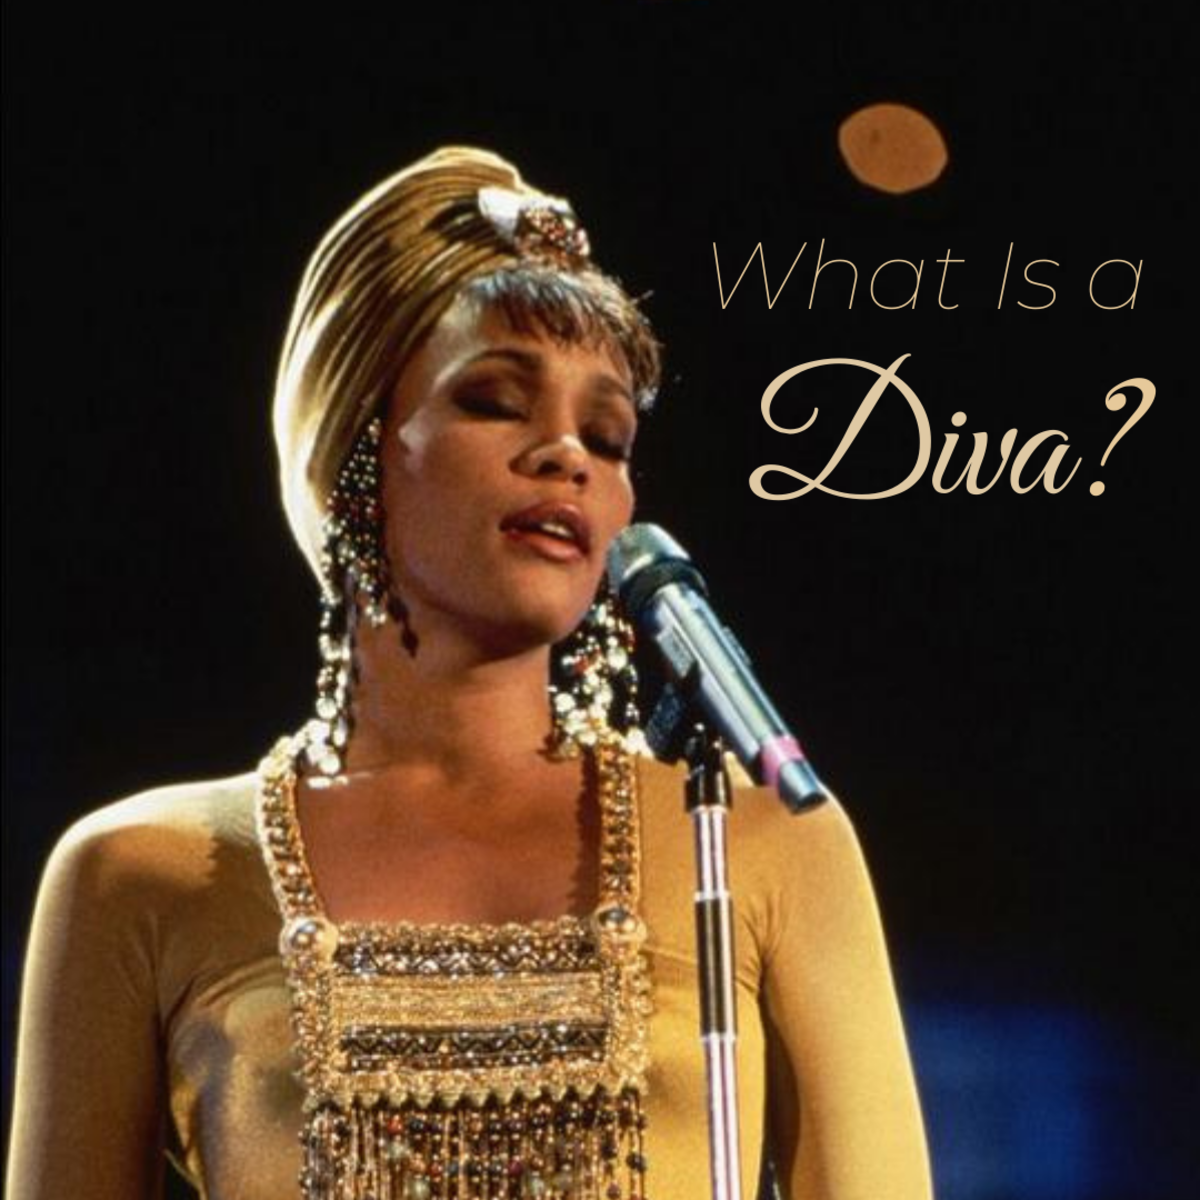 This article will take a look at the concept of a "diva," including what it means and how some of the famous ones got their labels.